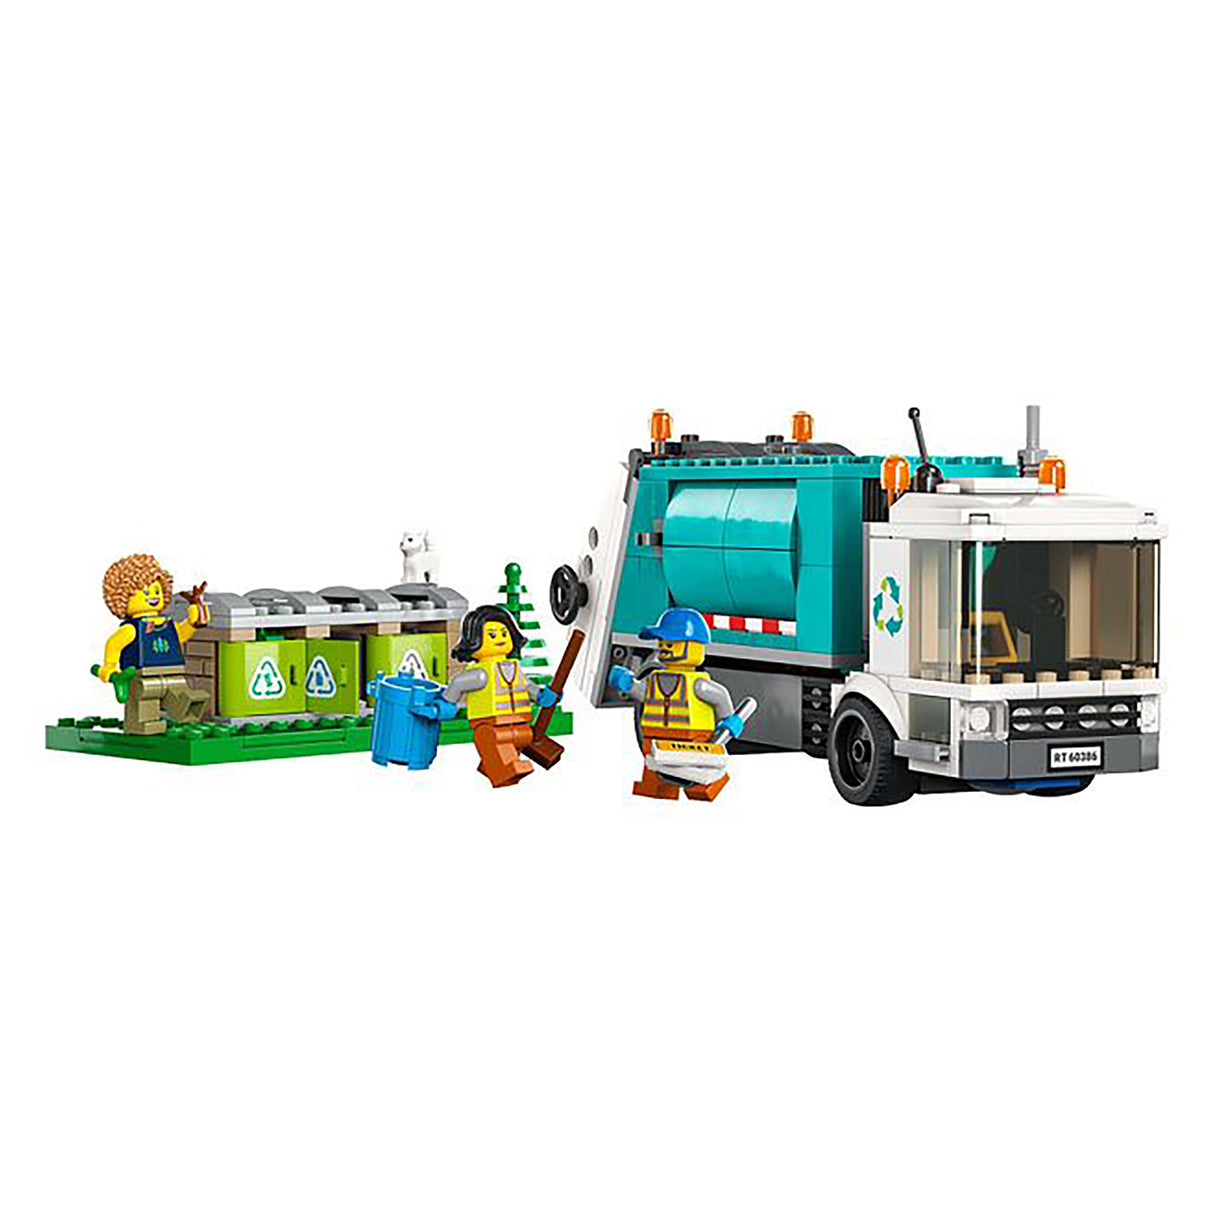 LEGO City Recycling Truck 60386 (261 pieces)